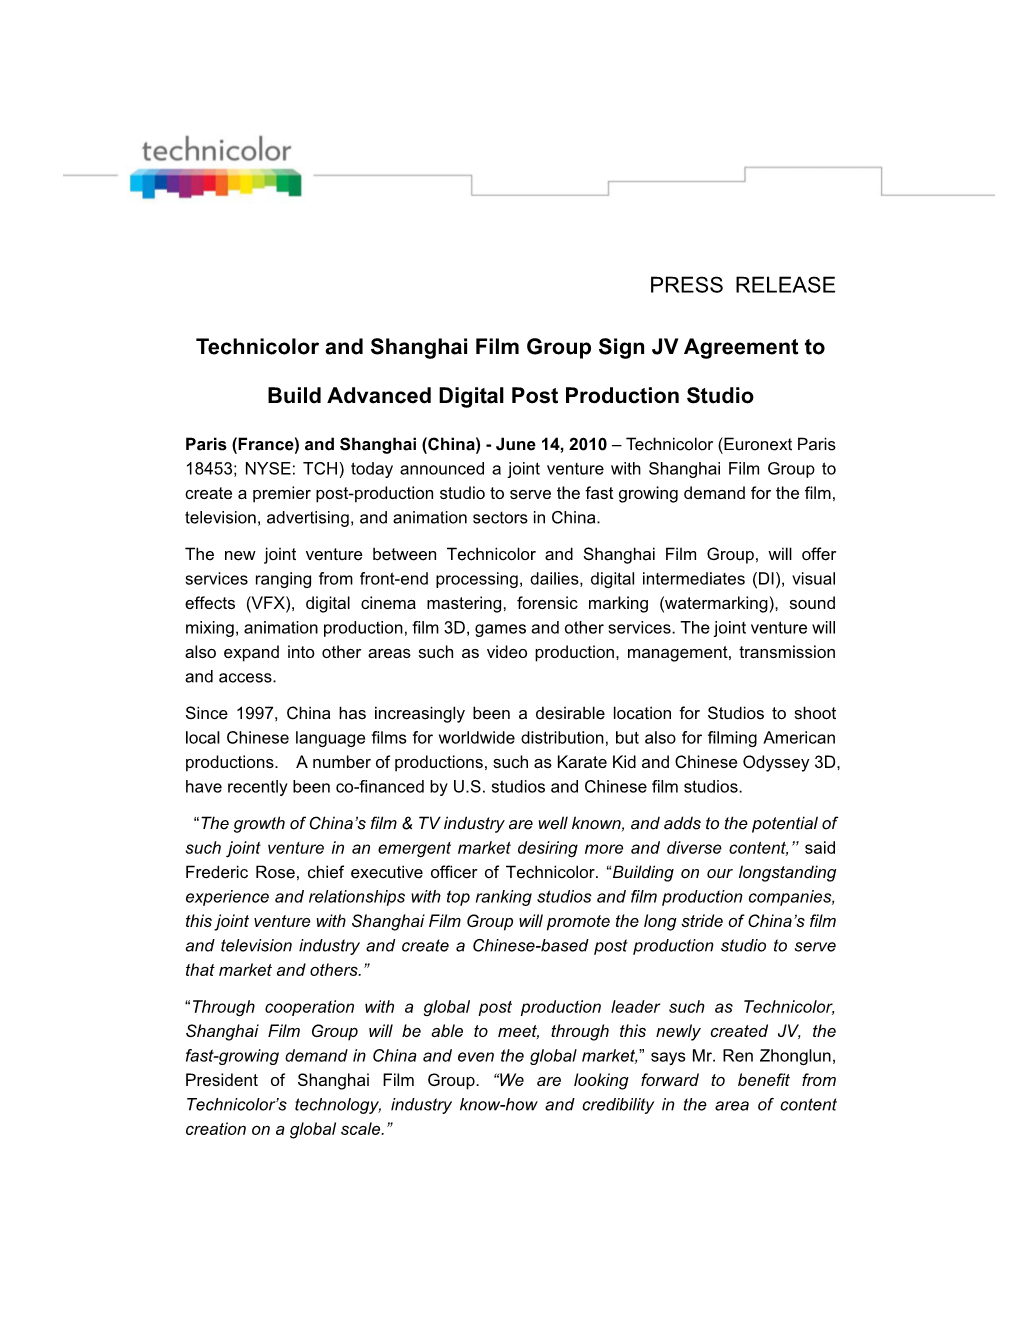 PRESS RELEASE Technicolor and Shanghai Film Group Sign JV Agreement to Build Advanced Digital Post Production Studio